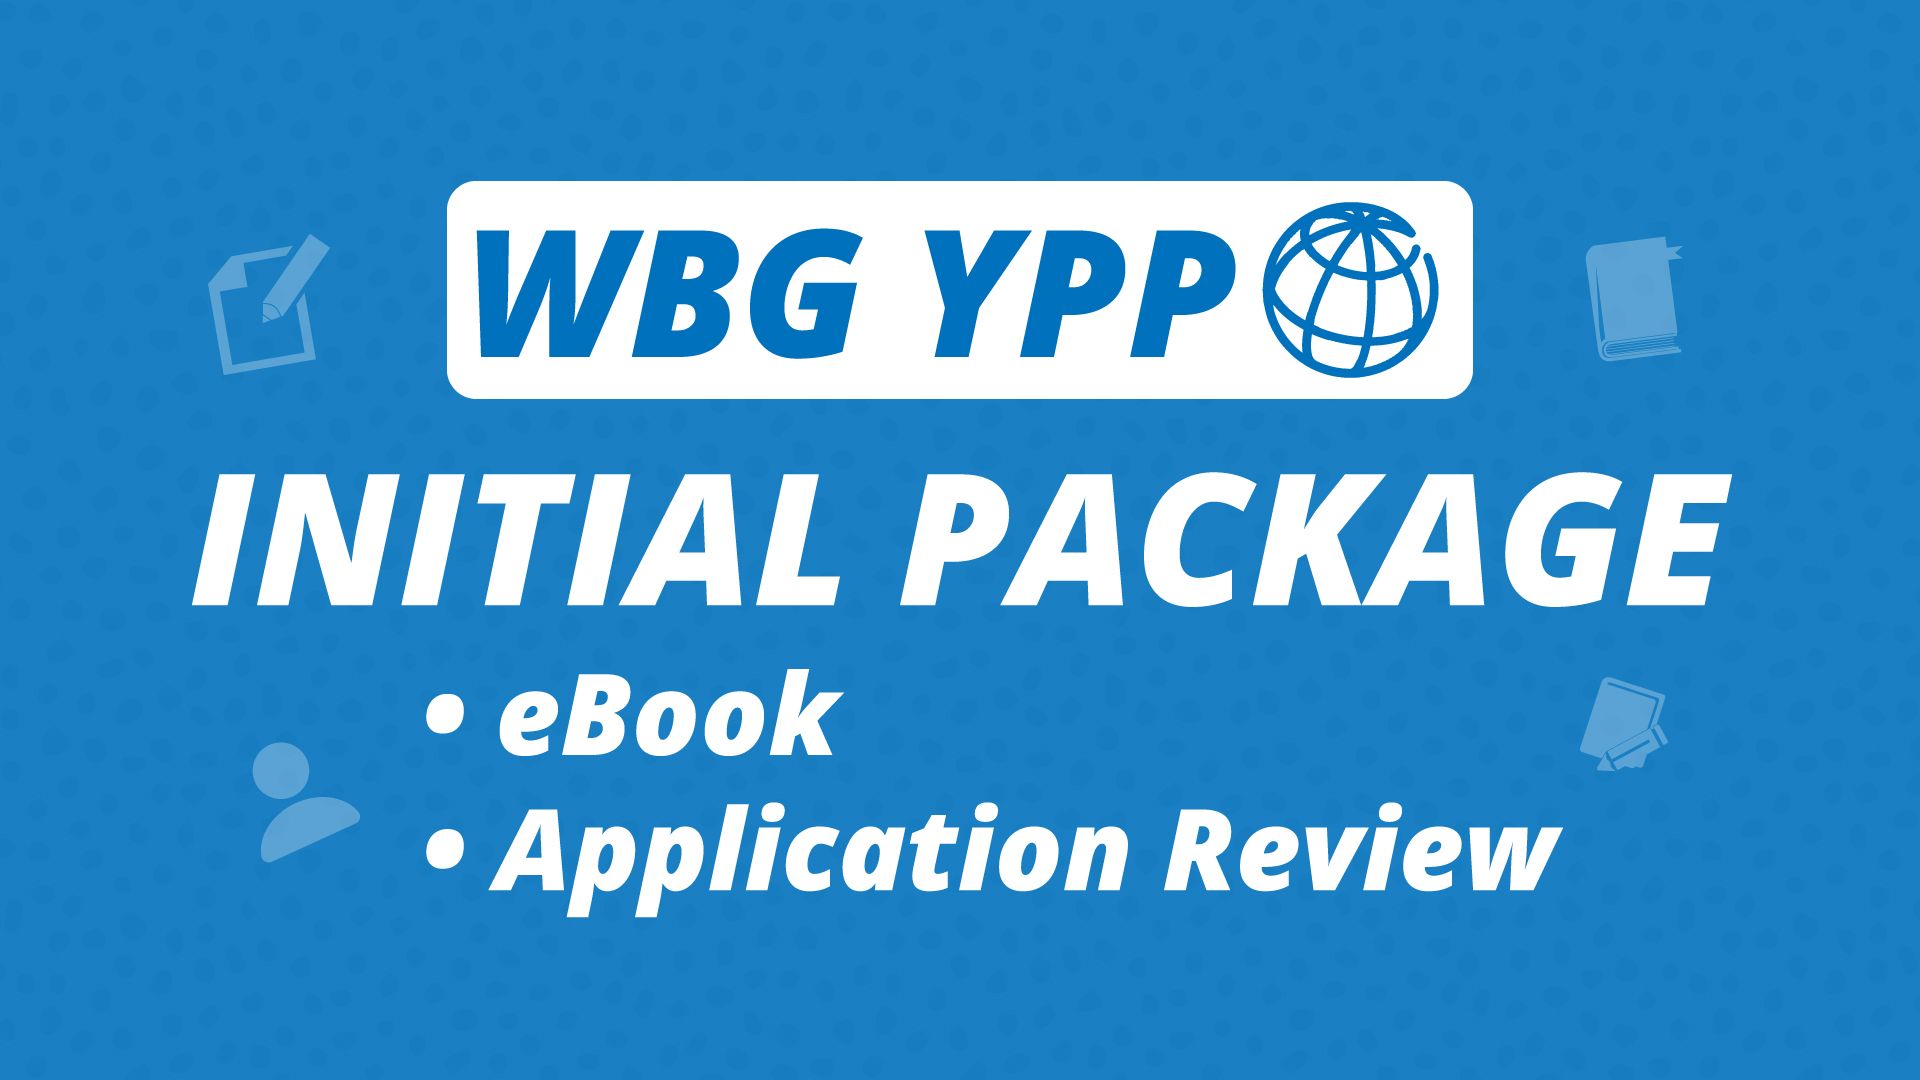 Initial-Package-WBGYPP-2